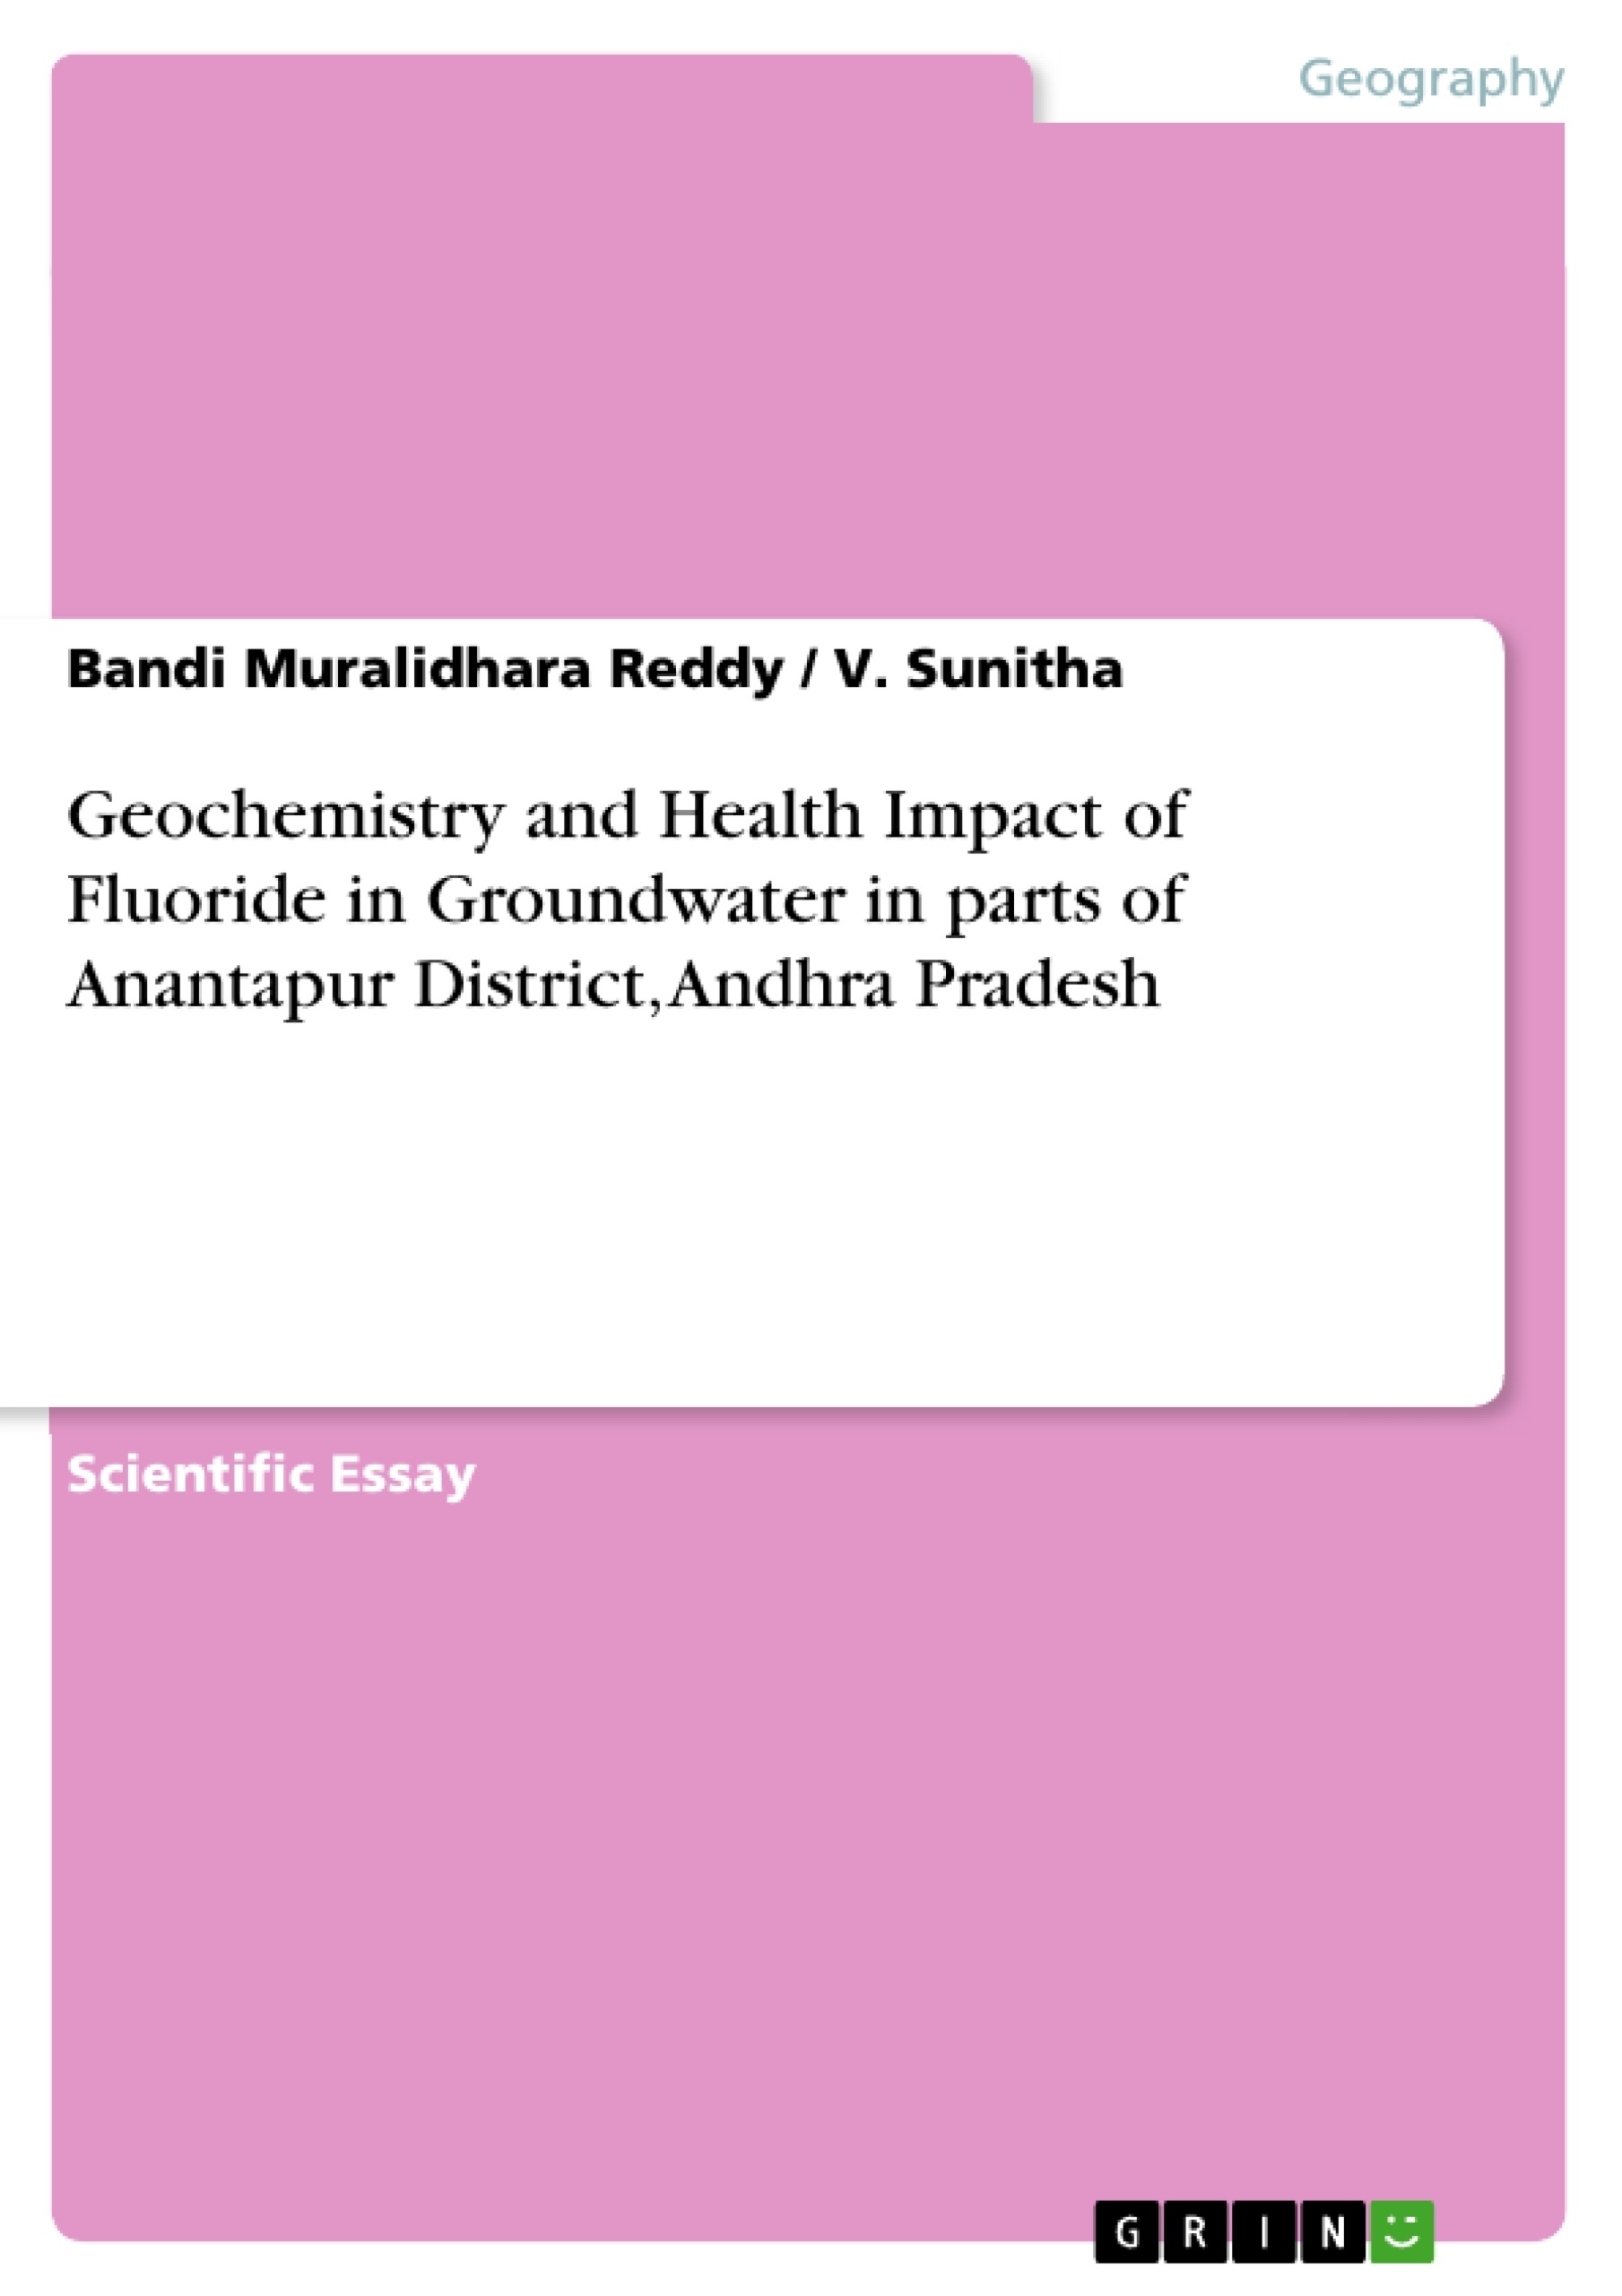 Título: Geochemistry and Health Impact of Fluoride in Groundwater in parts of Anantapur District, Andhra Pradesh